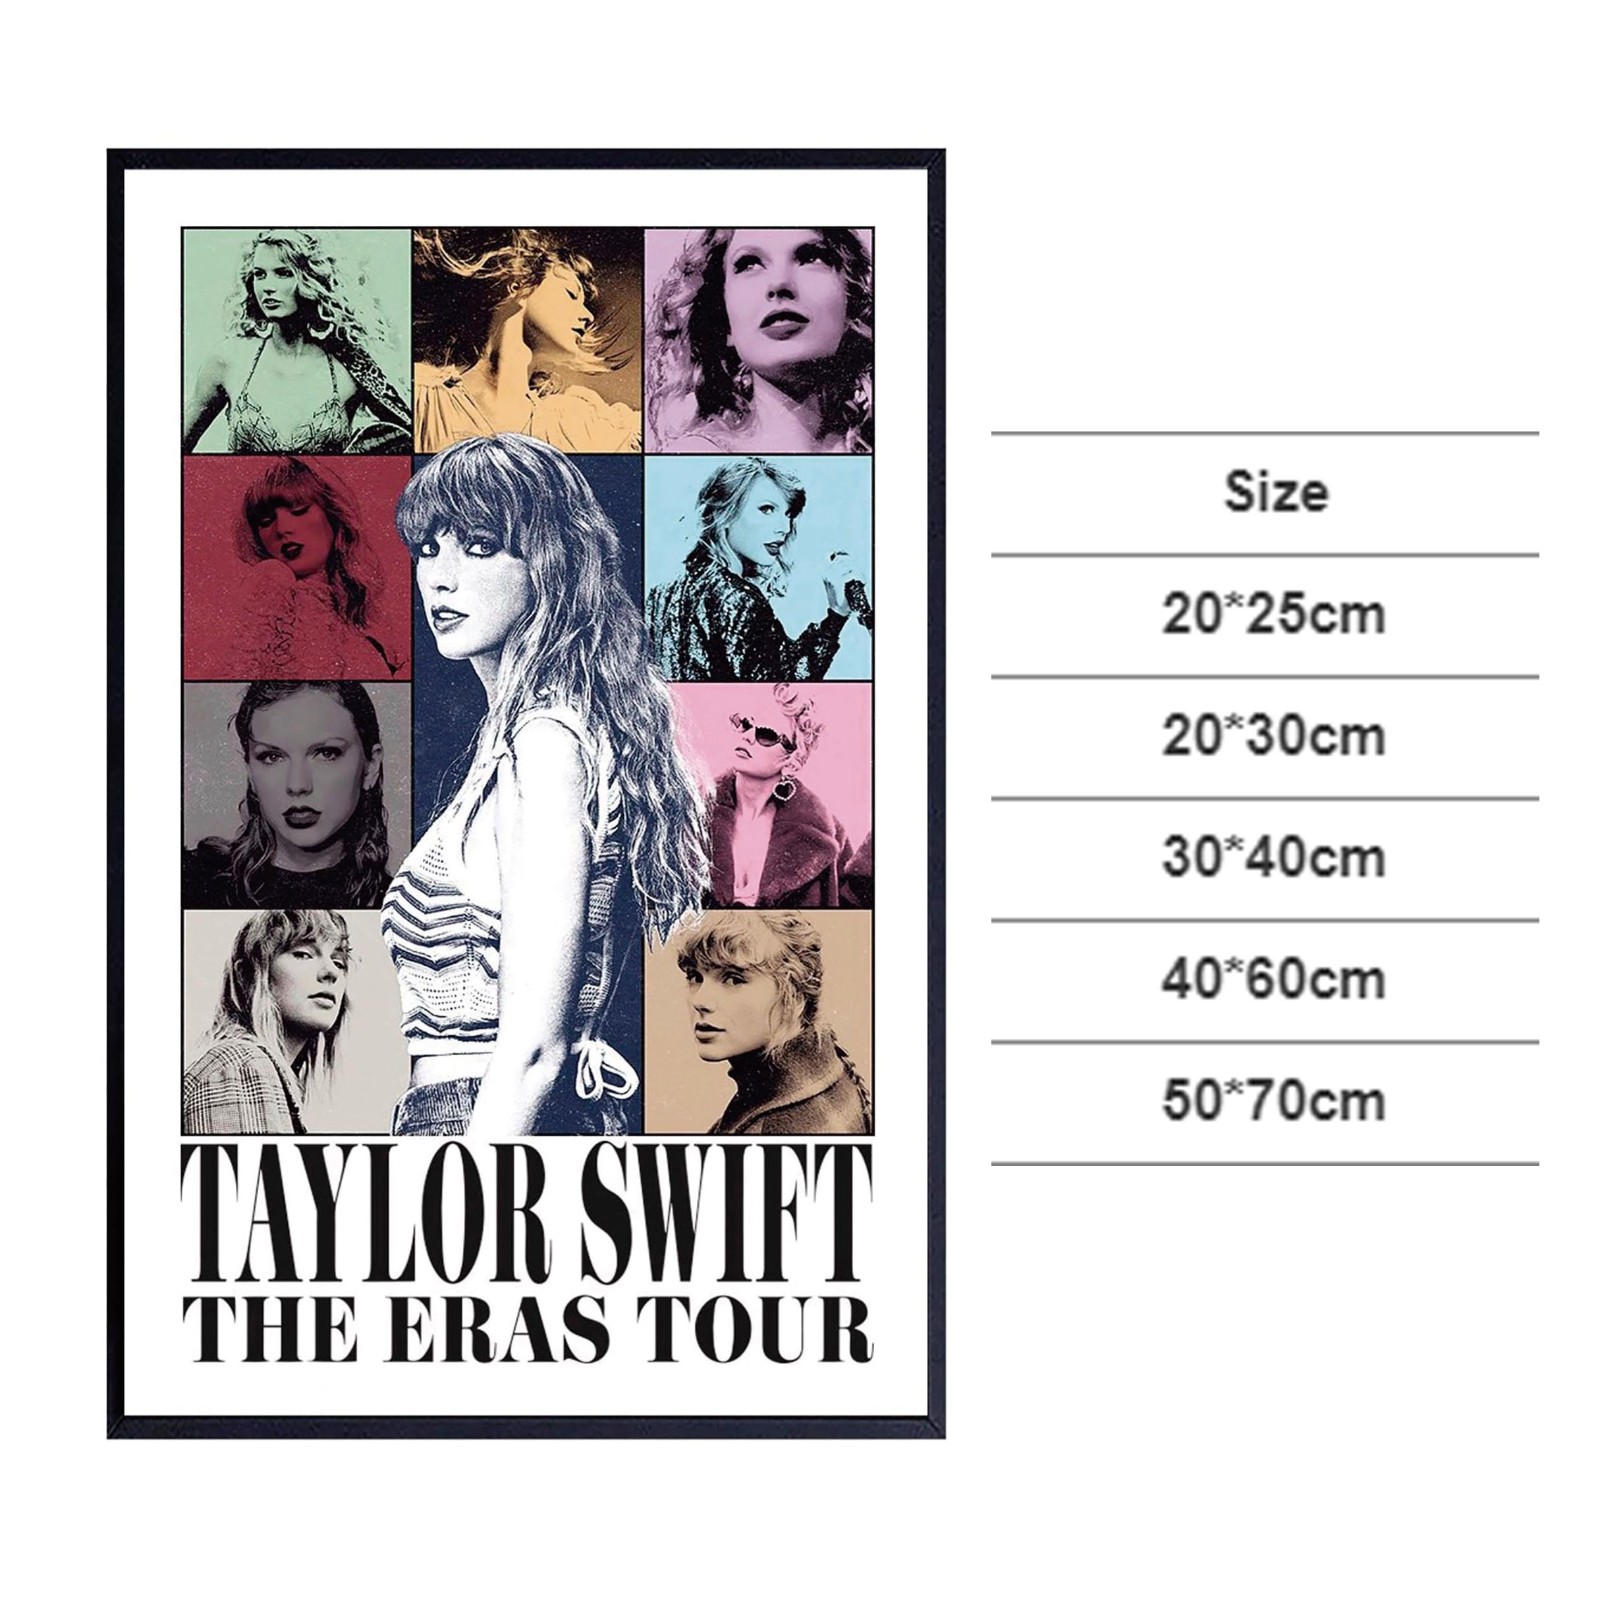 Taylor Swift Merch: Taylor Poster Wall Art Music Cover Album Posters Songs  for Wall Room Decor Painting Paper HD Print Bedroom Livingroom Decorations  19.5x27.3 